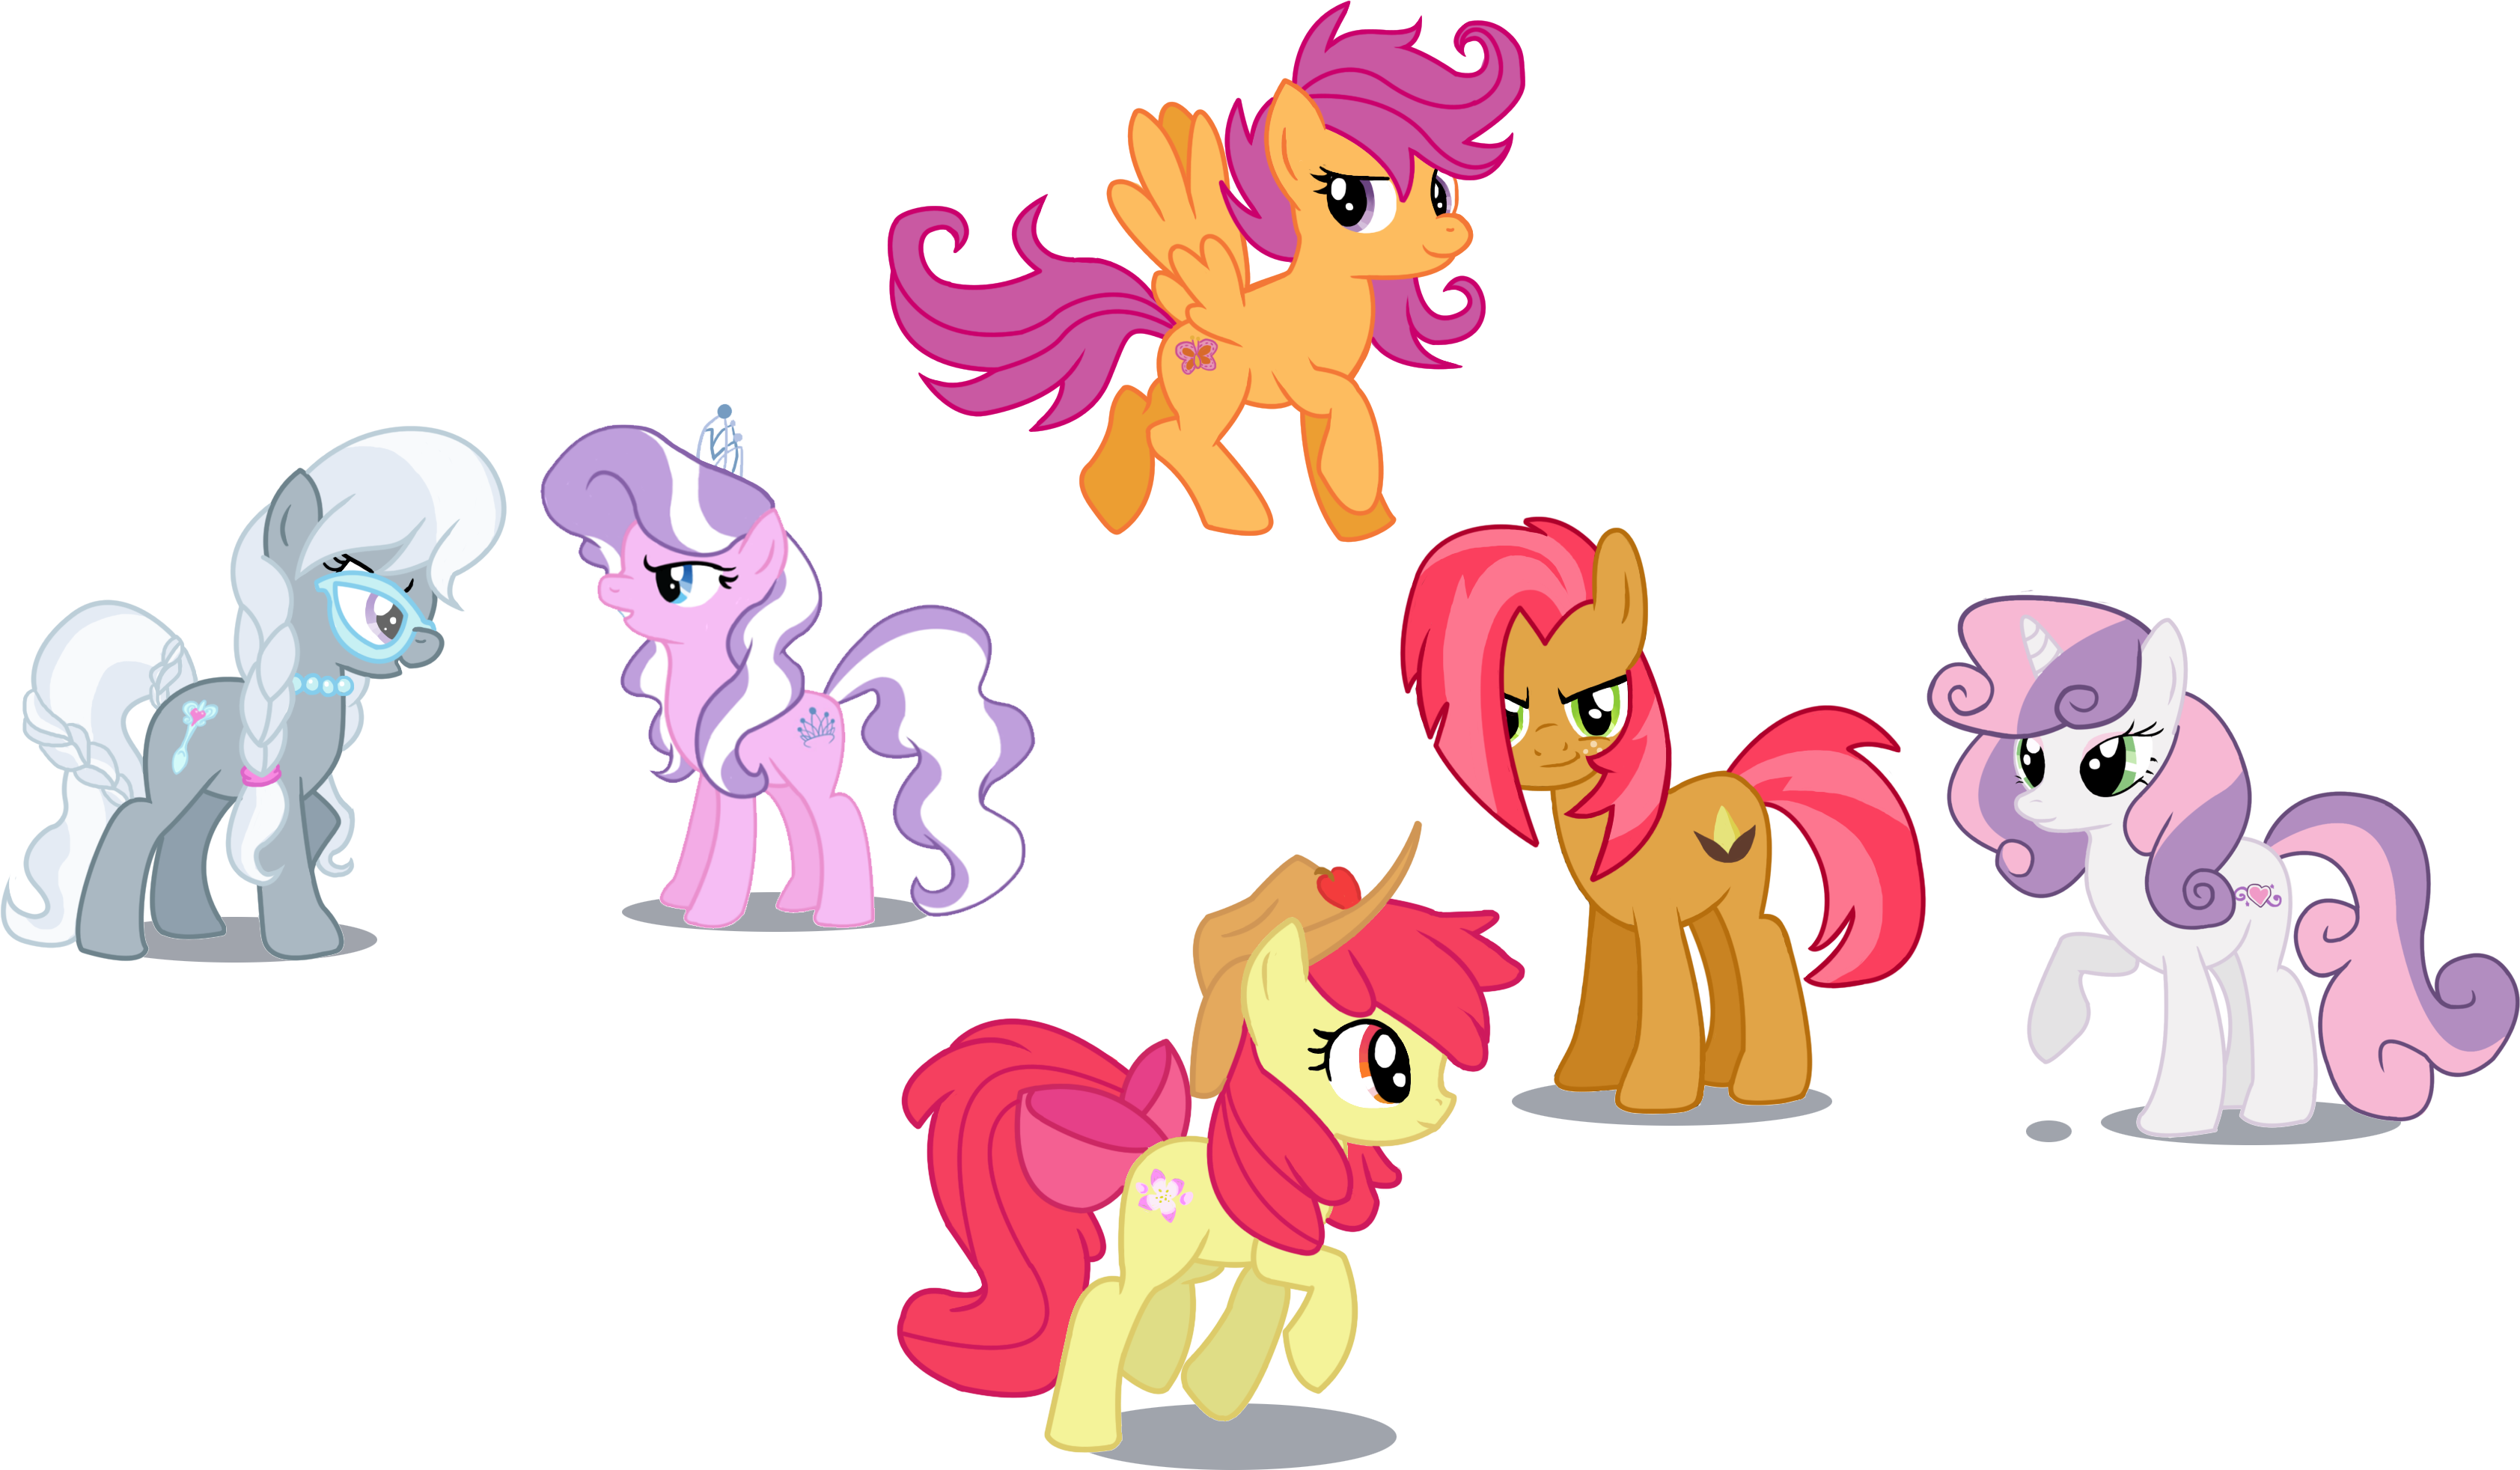 8af All Grown Up My Little Pony Friendship Is Magic - My Little Pony Cutie Mark Crusaders Grown Up (3367x1964)